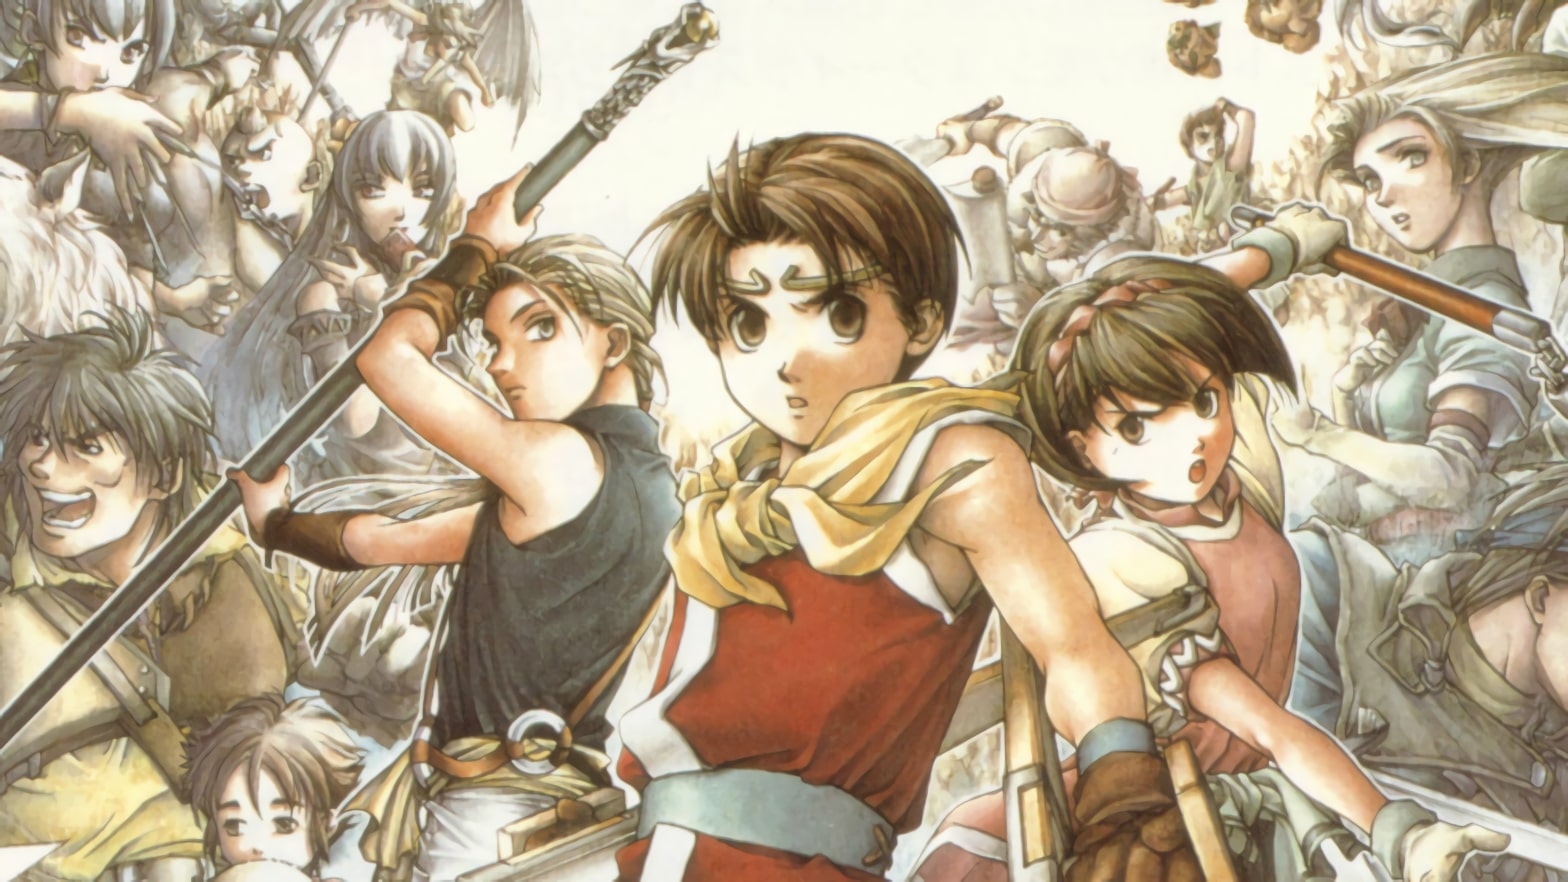 video games based on books - Suikoden video game screenshot